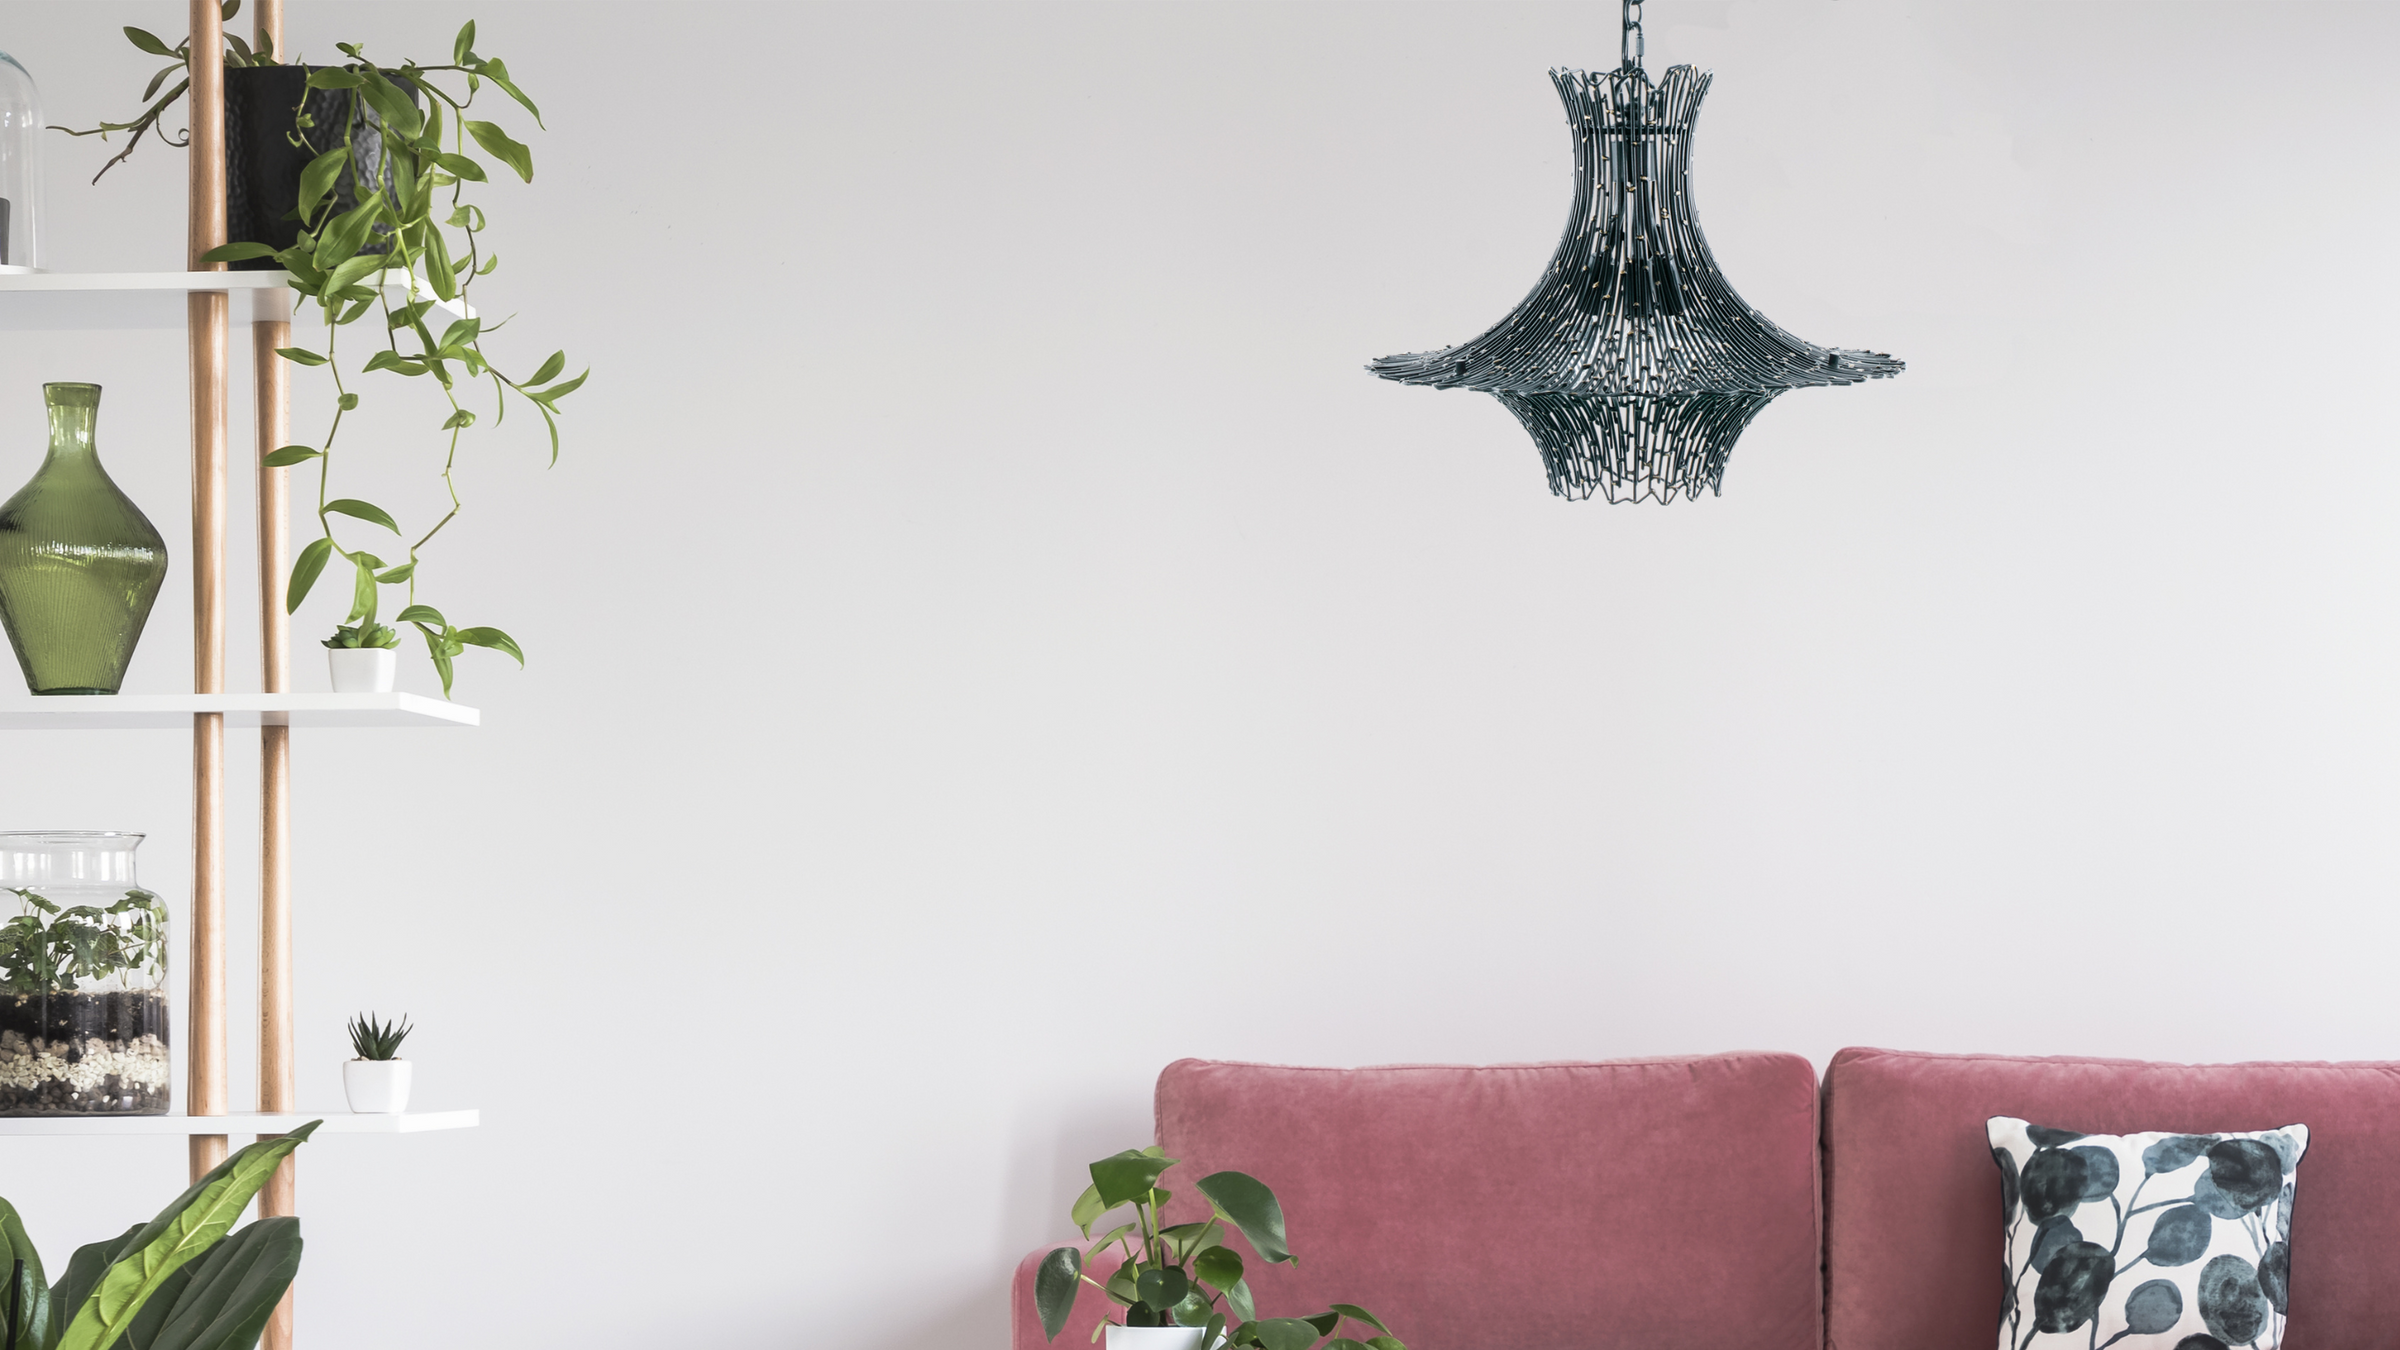 Rikki black steel light fixture shown in room with plants and a pink couch